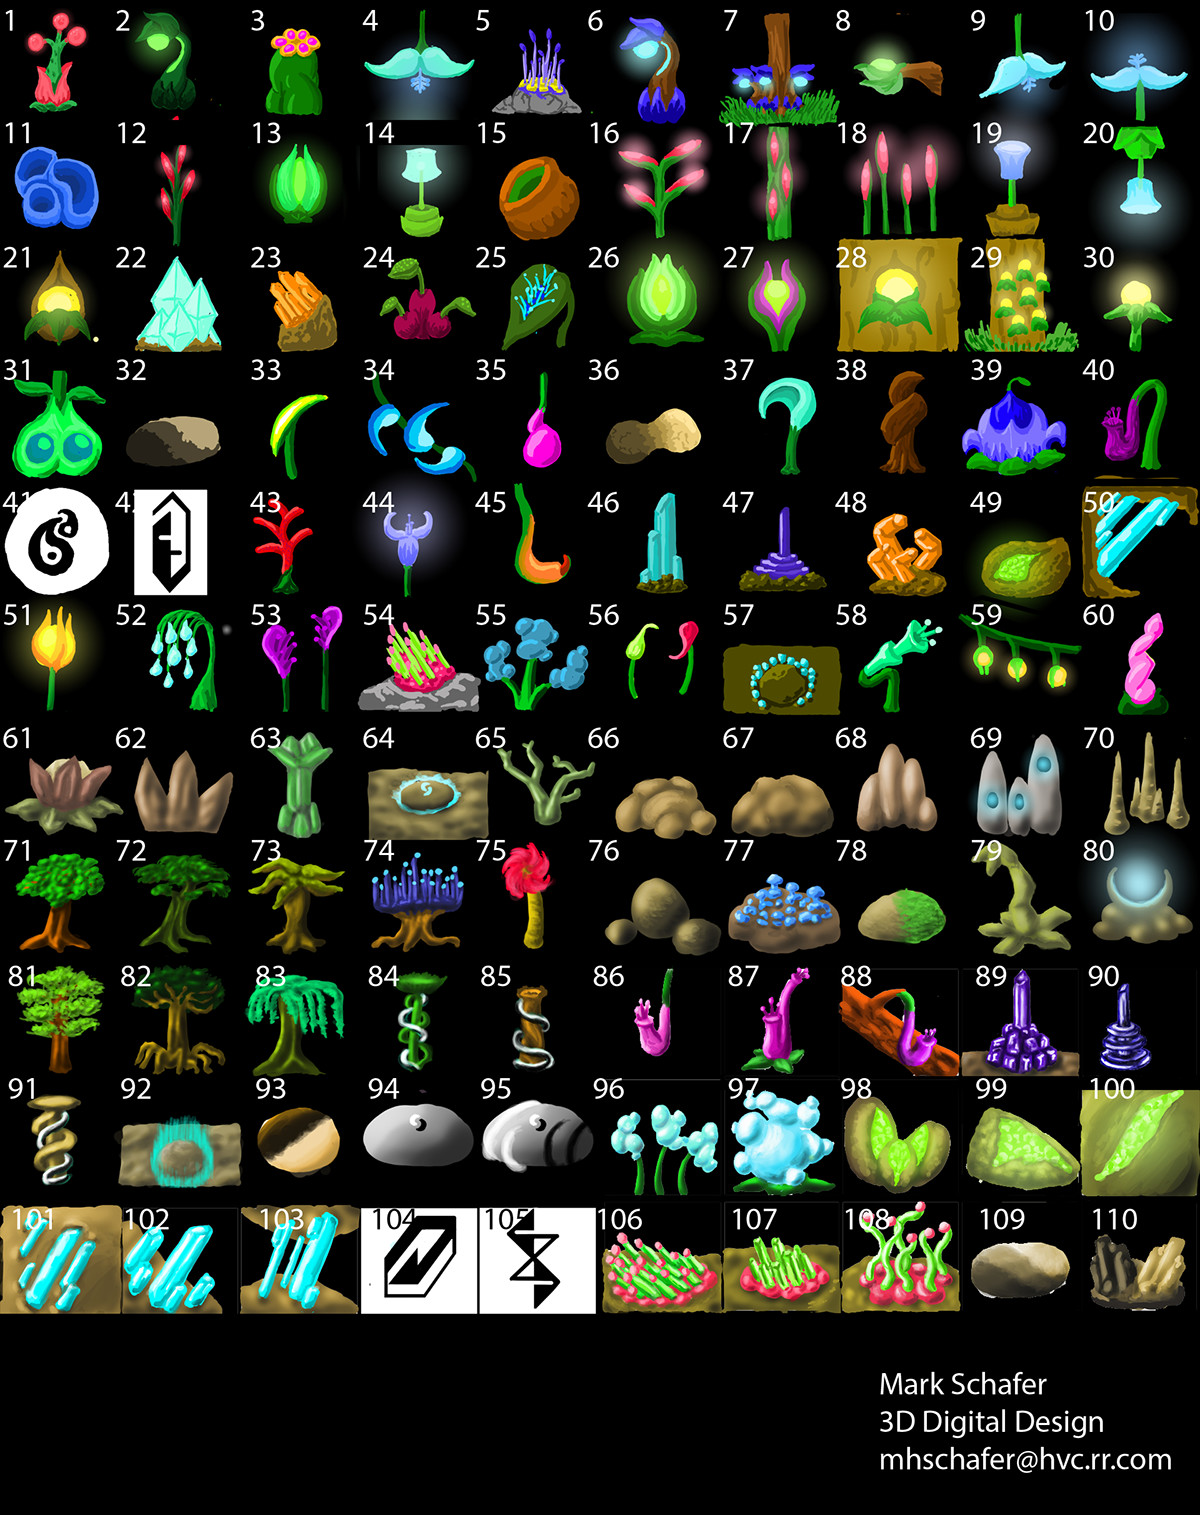 These are all of the concepts I sketched out, most foliage and geo formations, with a few icon concepts as well.